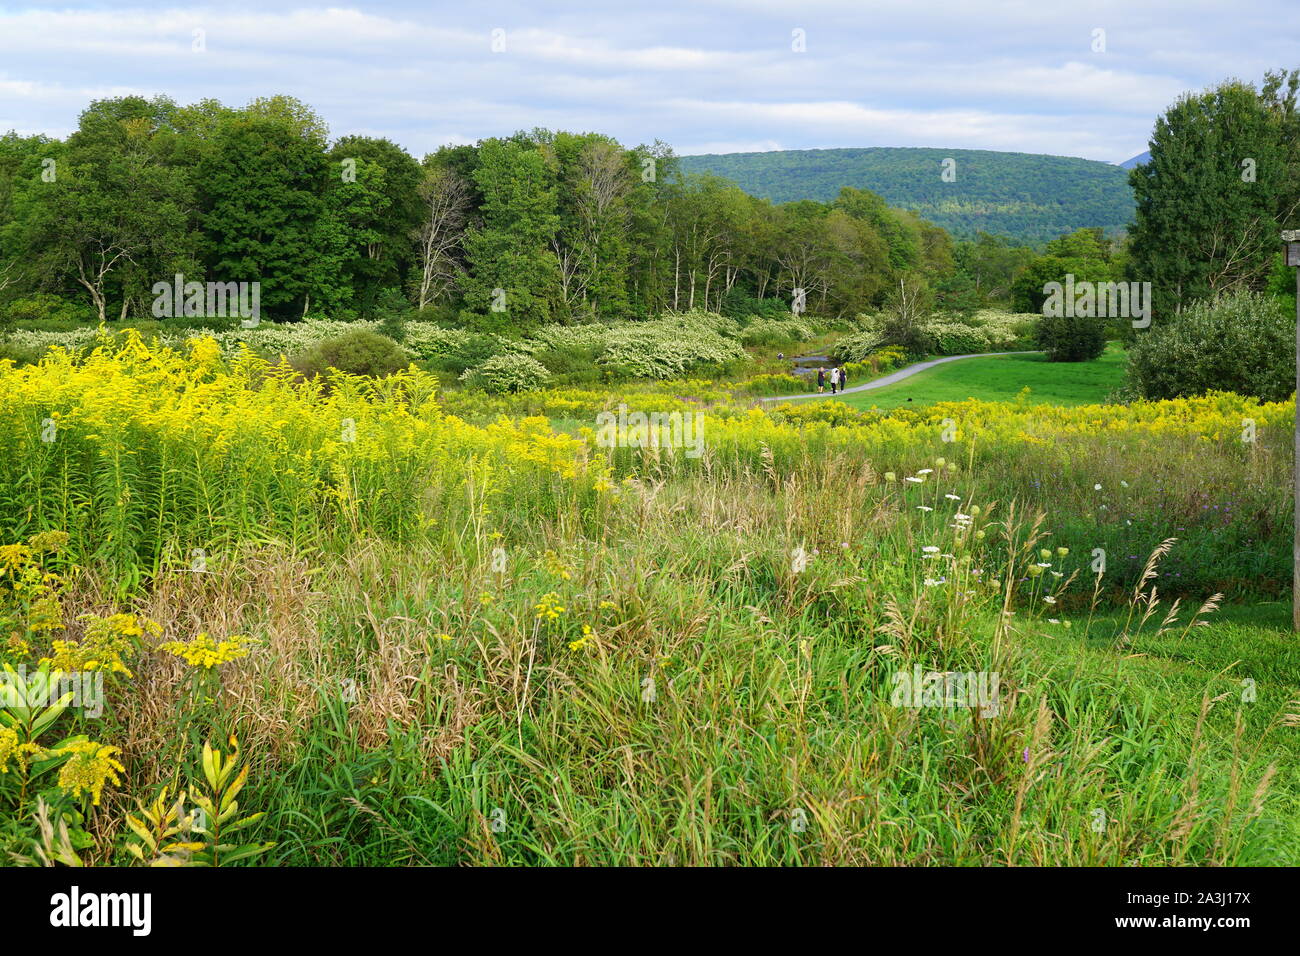 Picturesque landscape of The Windham Path in the Catskills area, Upstate New York, USA Stock Photo